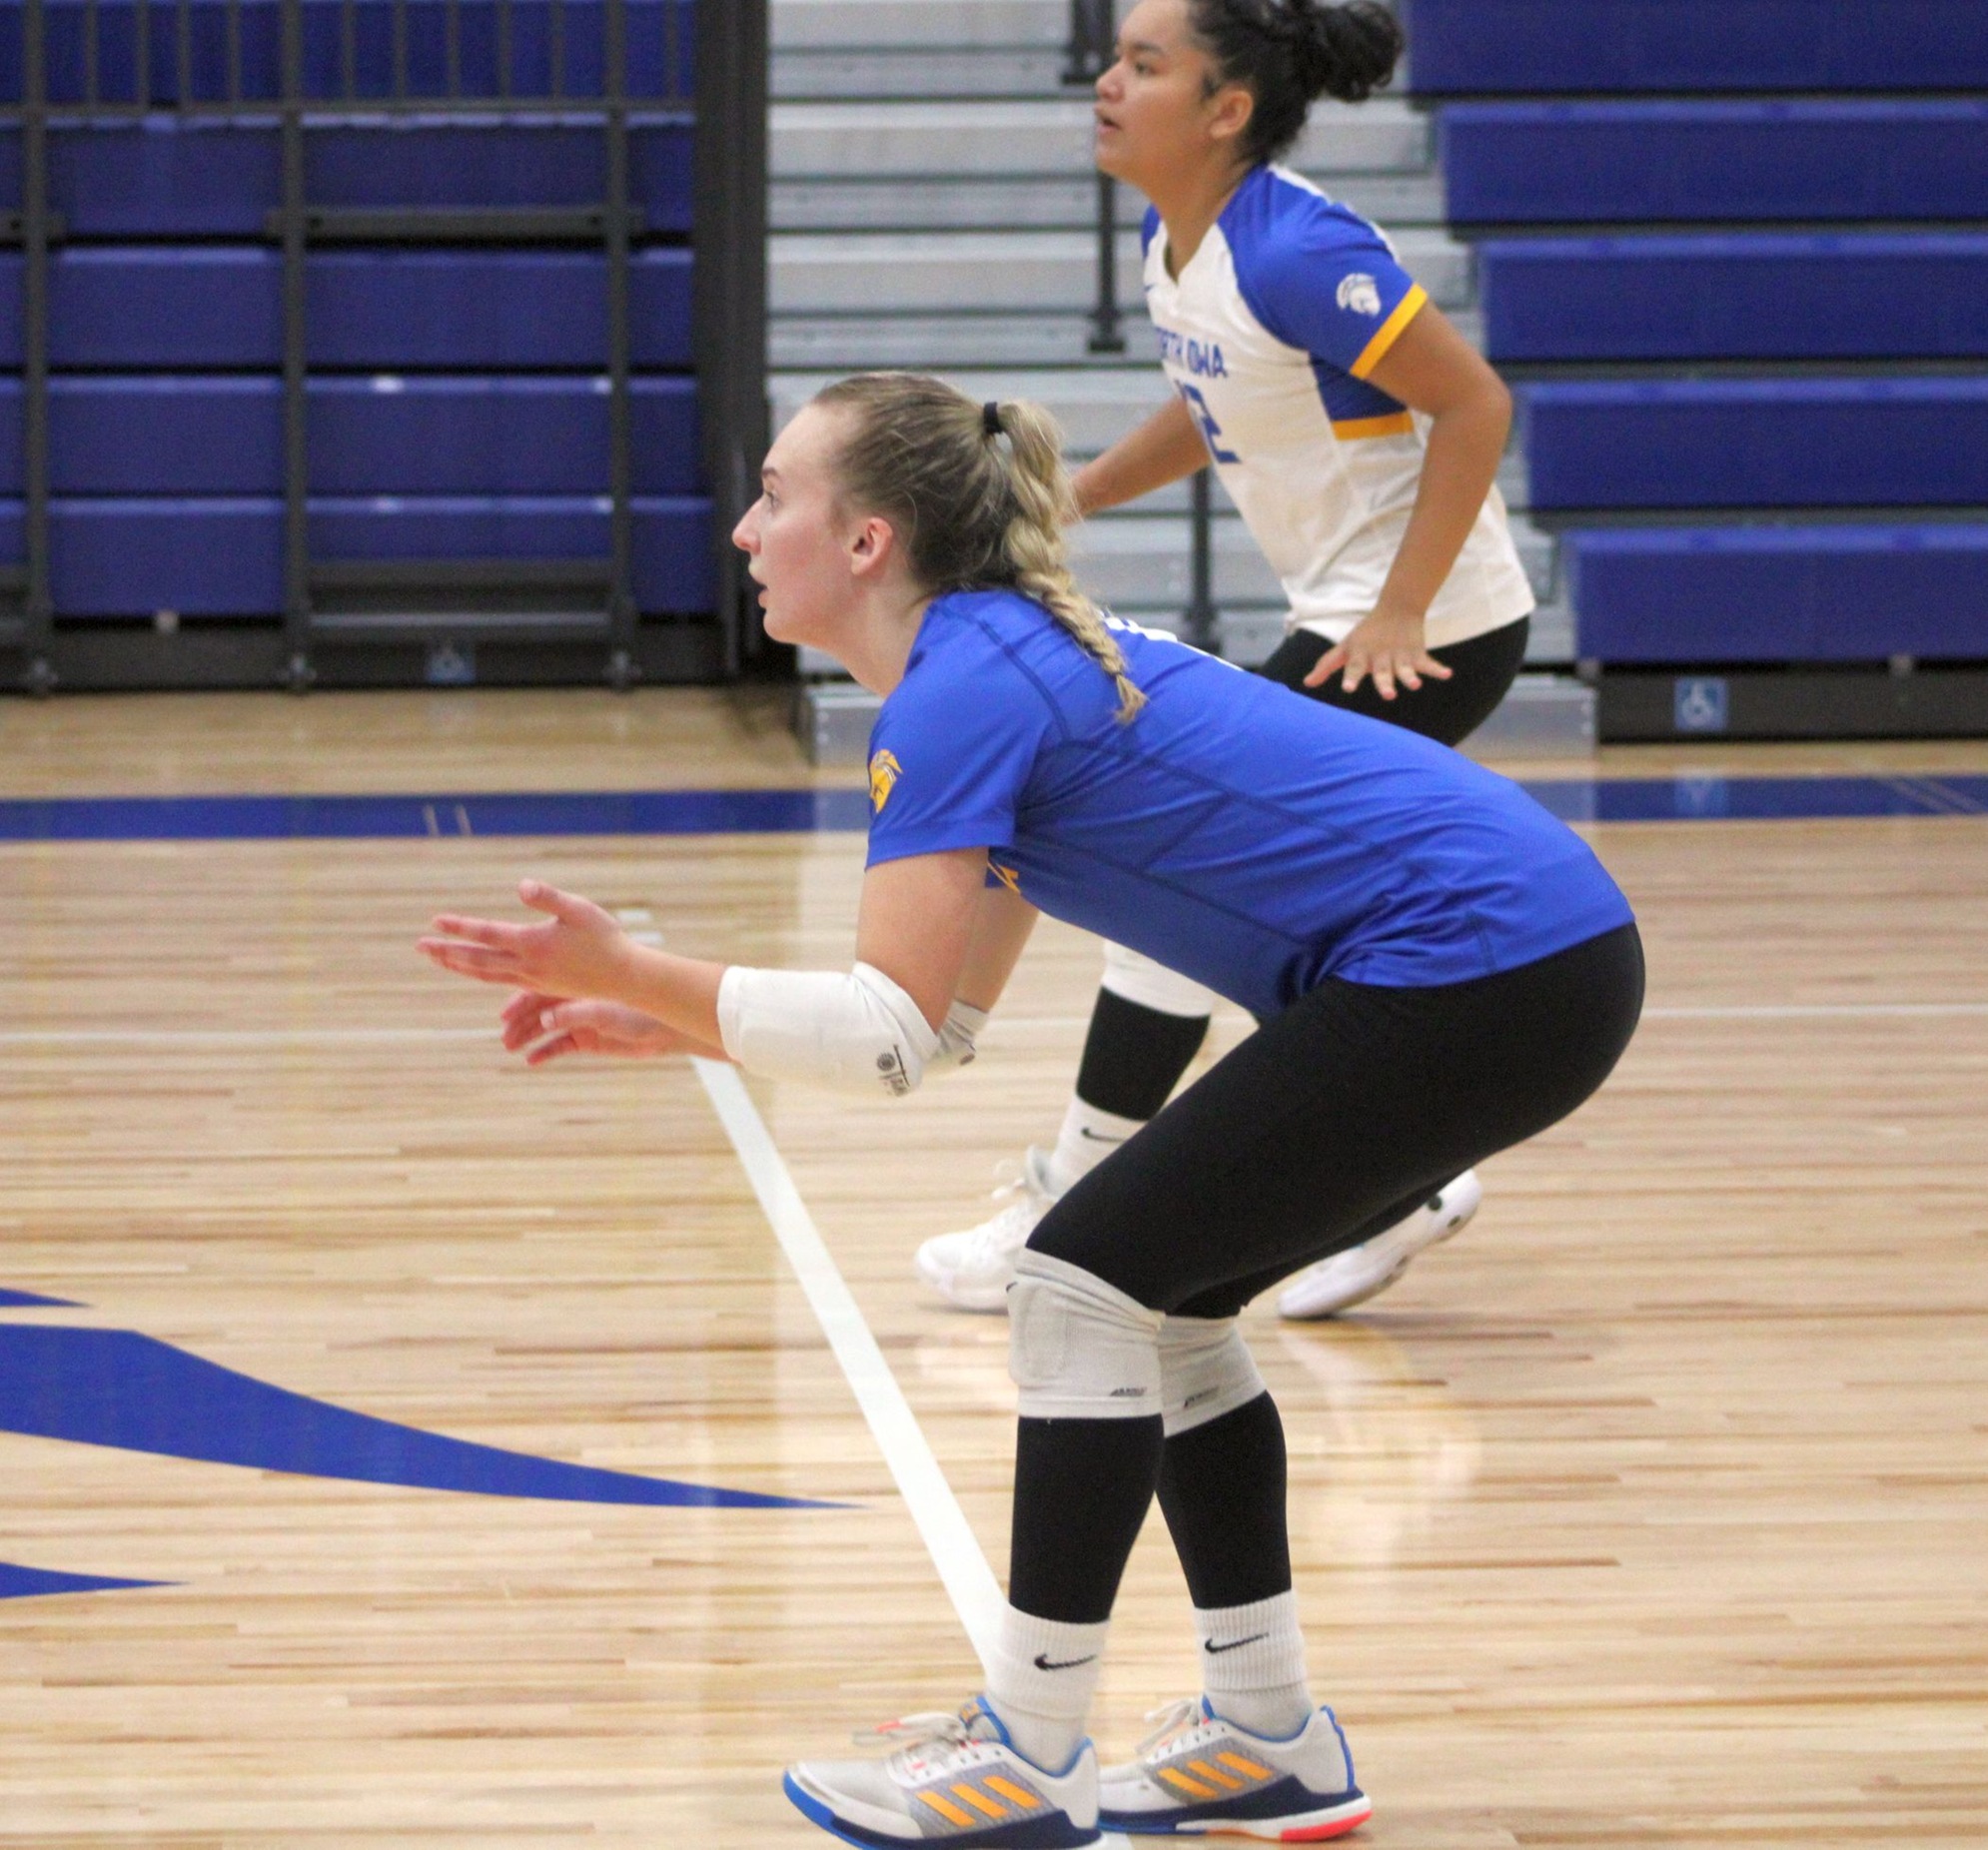 NIACC's Kennedy Schwiesow gets ready for the serve in Saturday's match against Marshalltown CC.